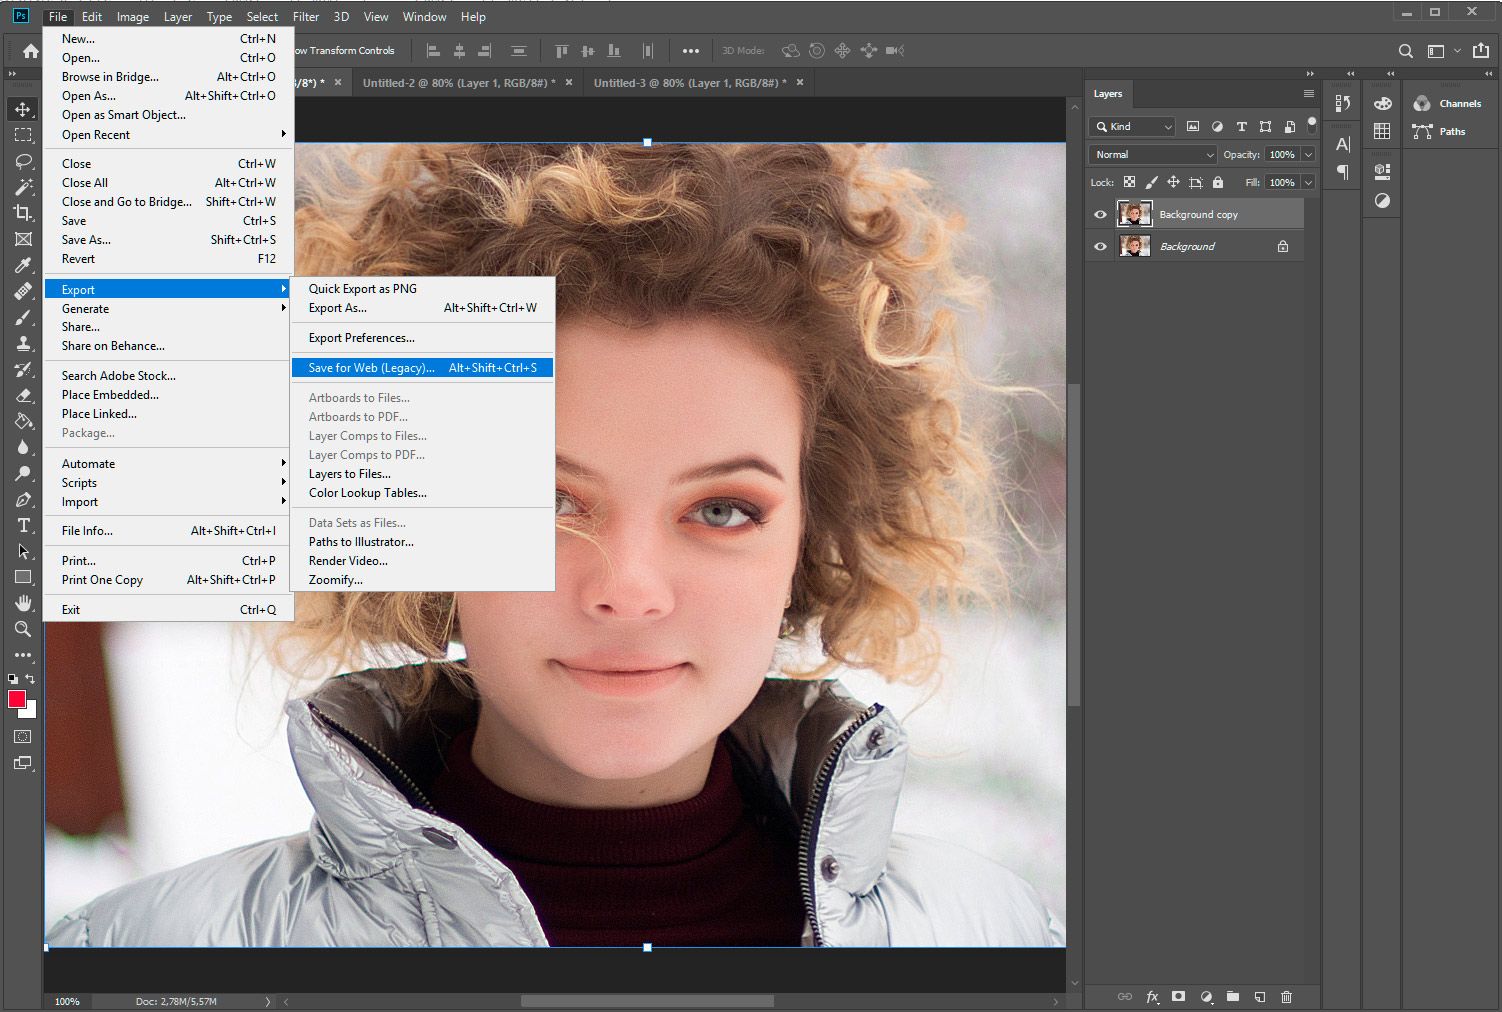 Online converters: There are many online tools available that can convert PSD to JPG, such as Online-Convert.com, Convertio, and Zamzar.
Photoshop Actions: If you have Adobe Photoshop, you can create an action that can convert PSD to JPG in batches.